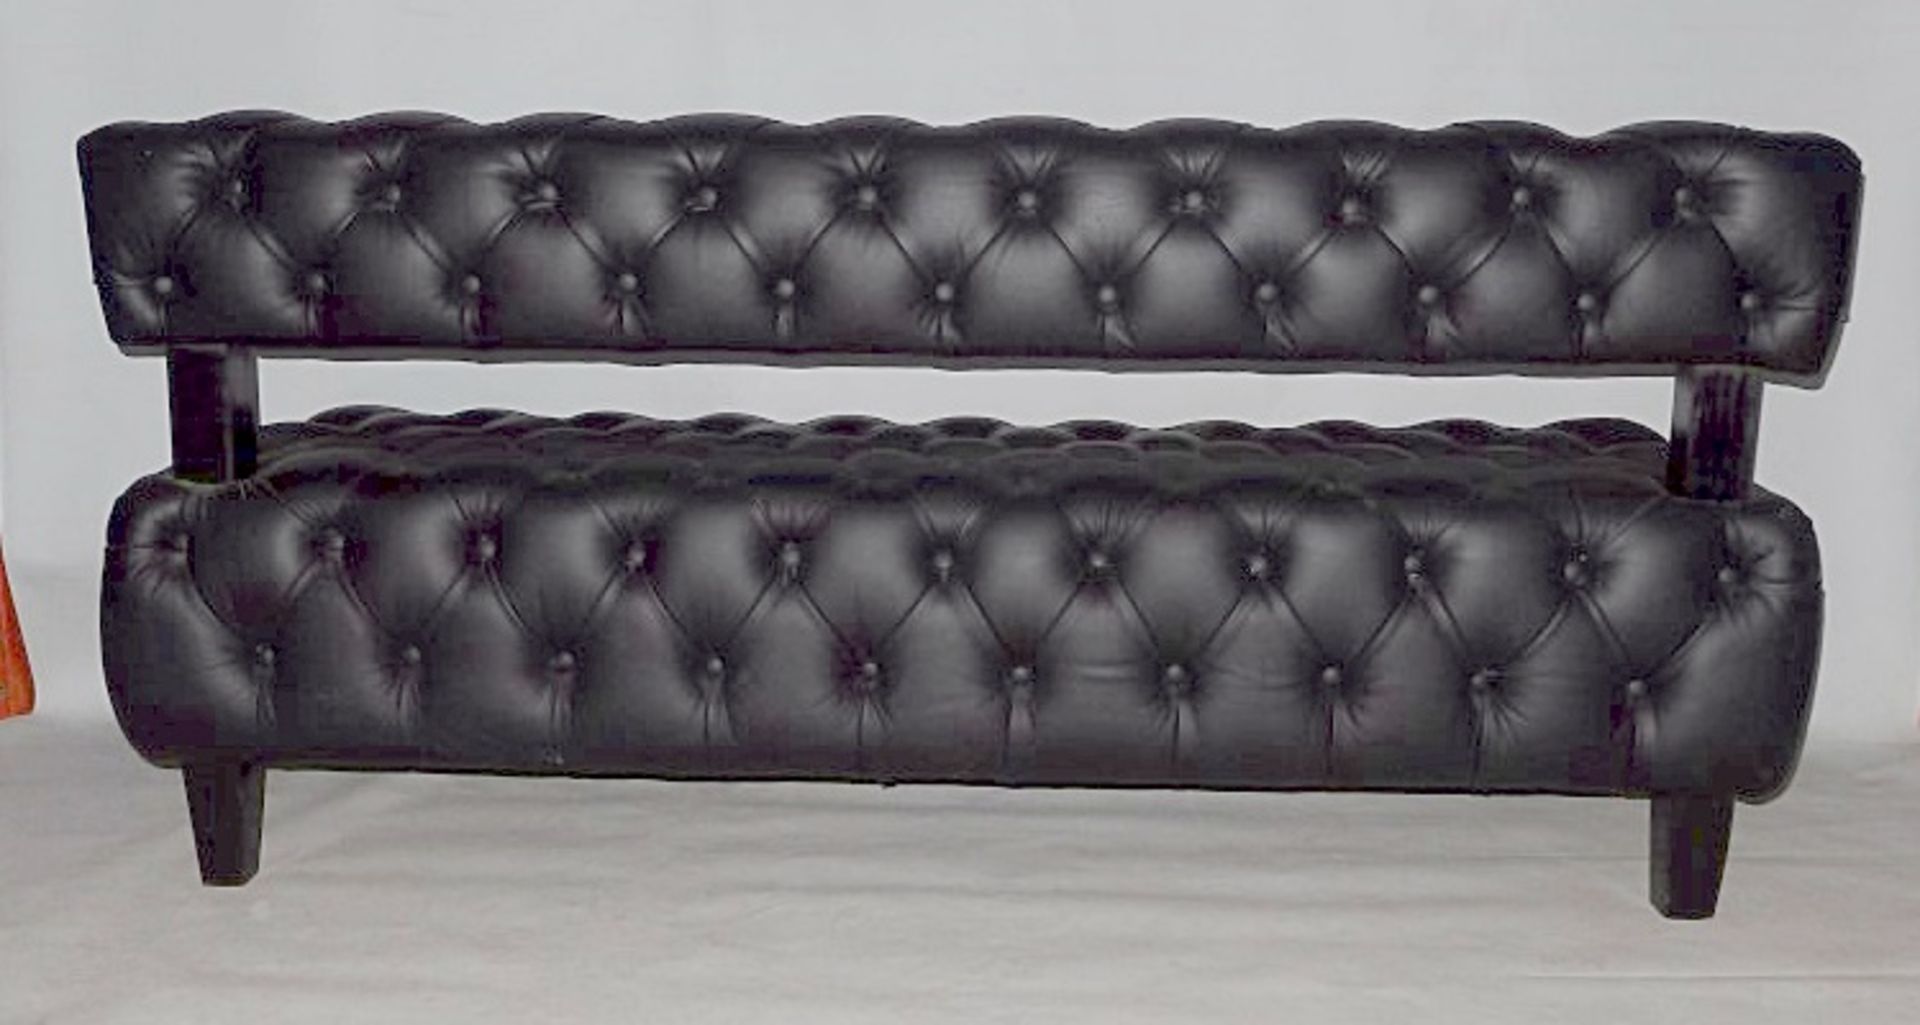 1 x Black Leather Buttoned Bench Seating - Ref: DB017 - Expertly Built And Upholstered By British - Image 4 of 5